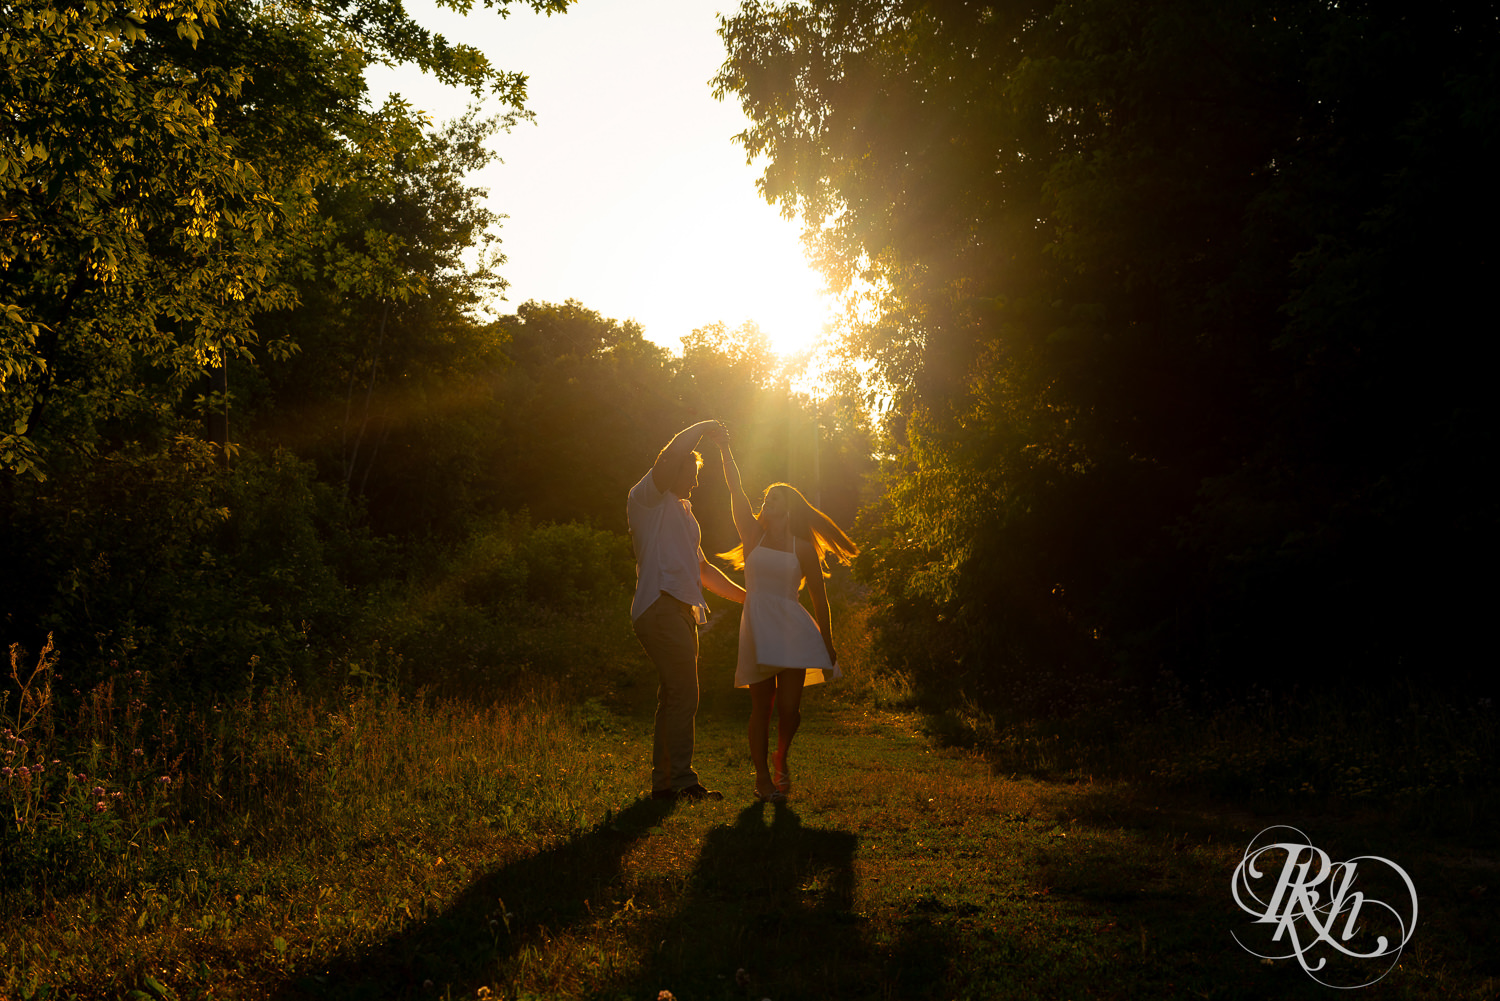 Man in white shirt and woman in white dress dance during golden hour engagement photography at Lebanon Hills in Eagan, Minnesota.